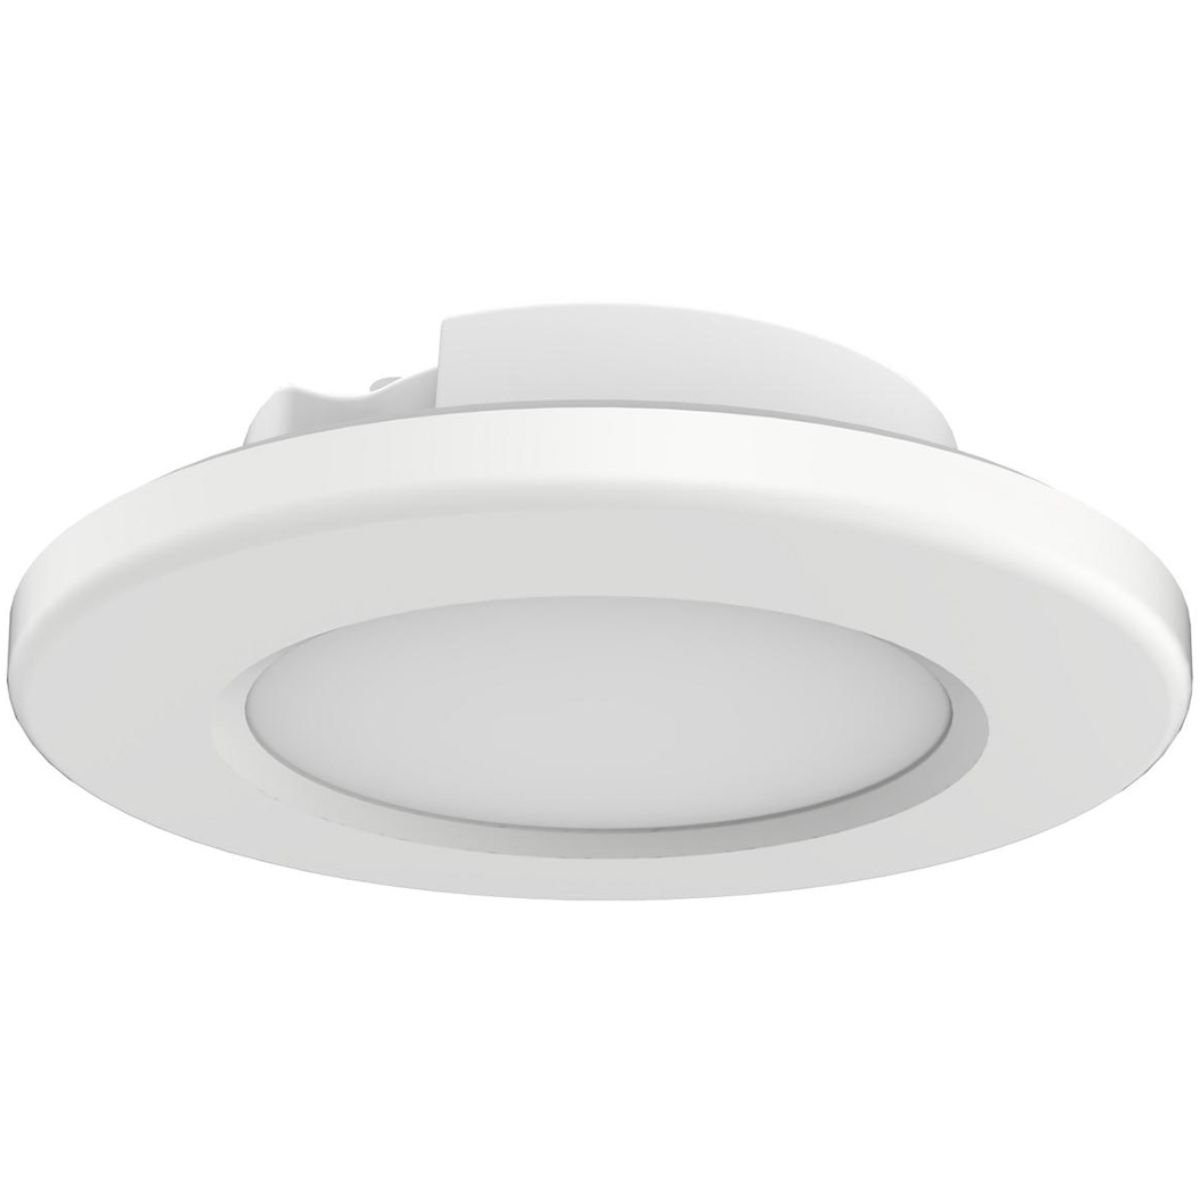 4 In. LED Disk / Surface Mount Light 5000K White Finish Contractor Pack Of 6